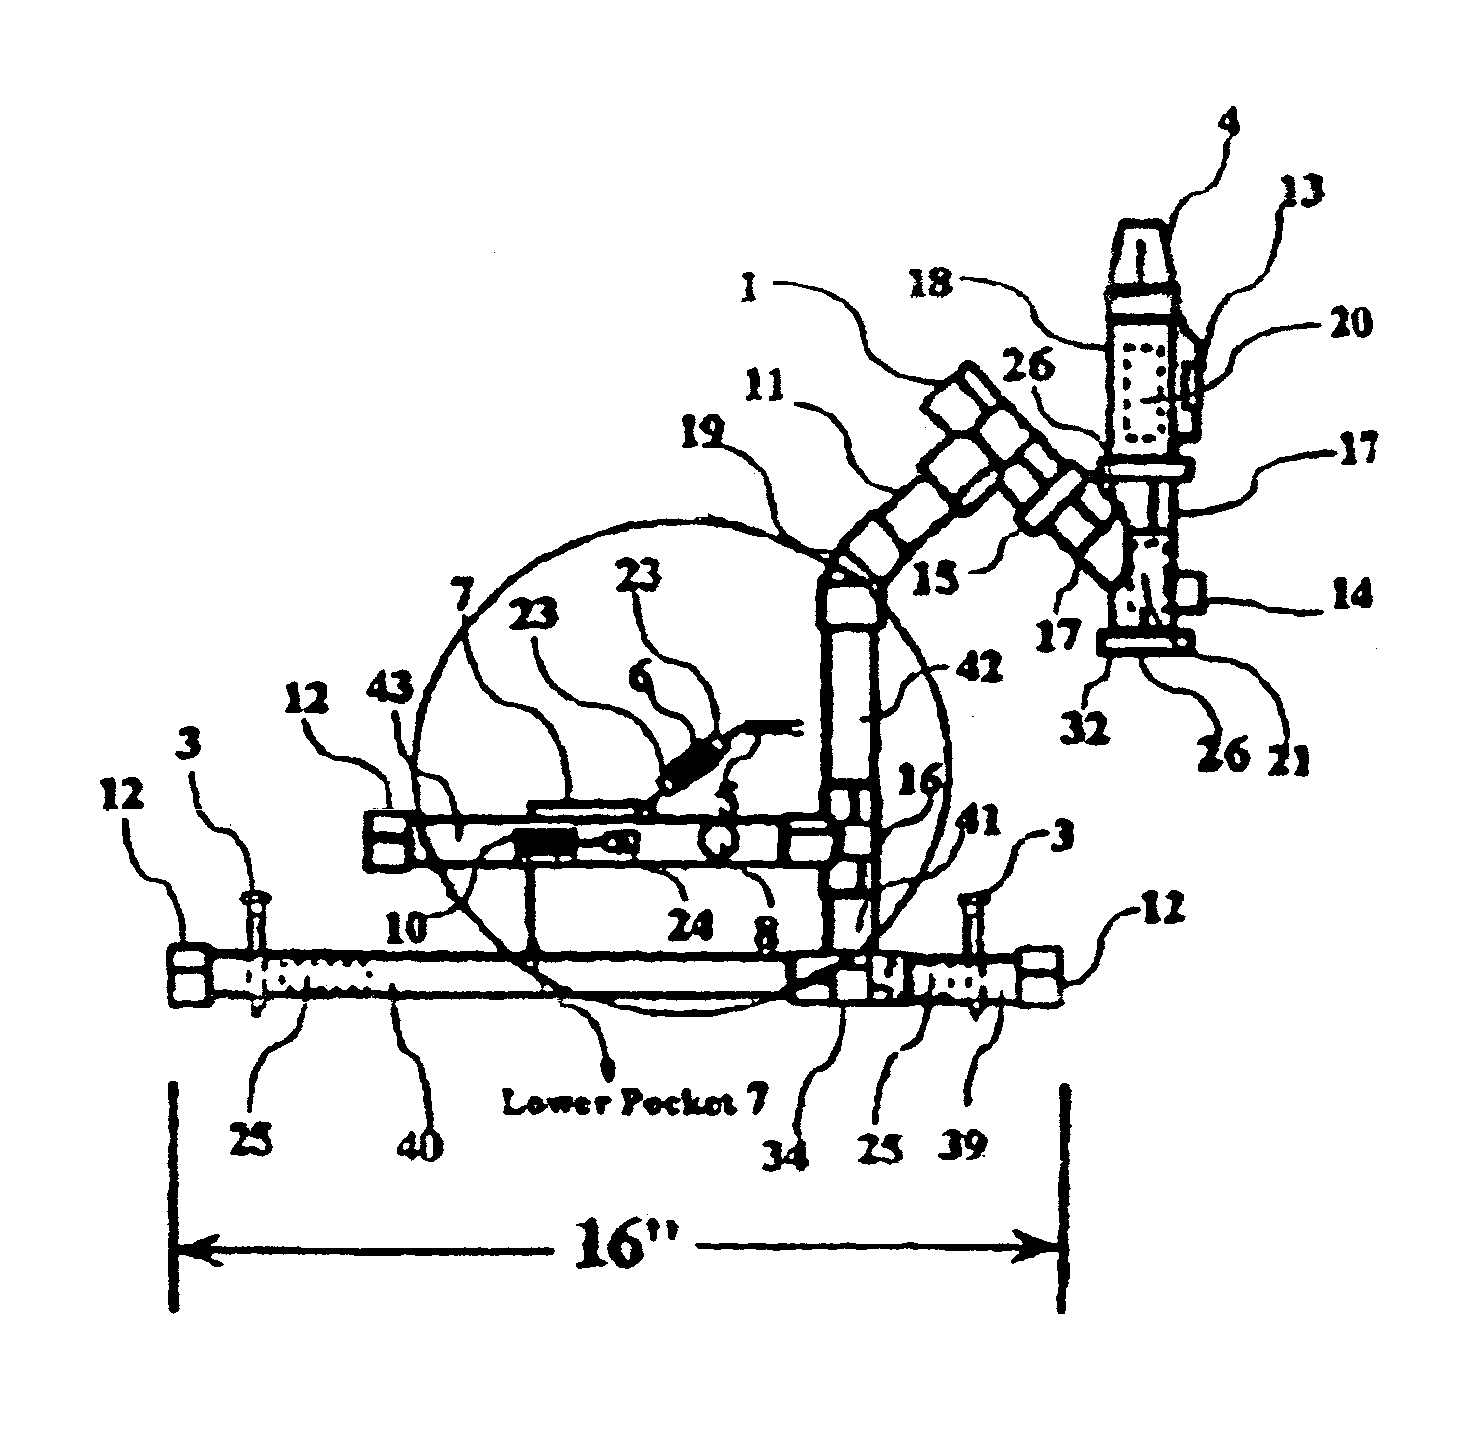 Apparatus and method for fishing utilizing the jig fishing system